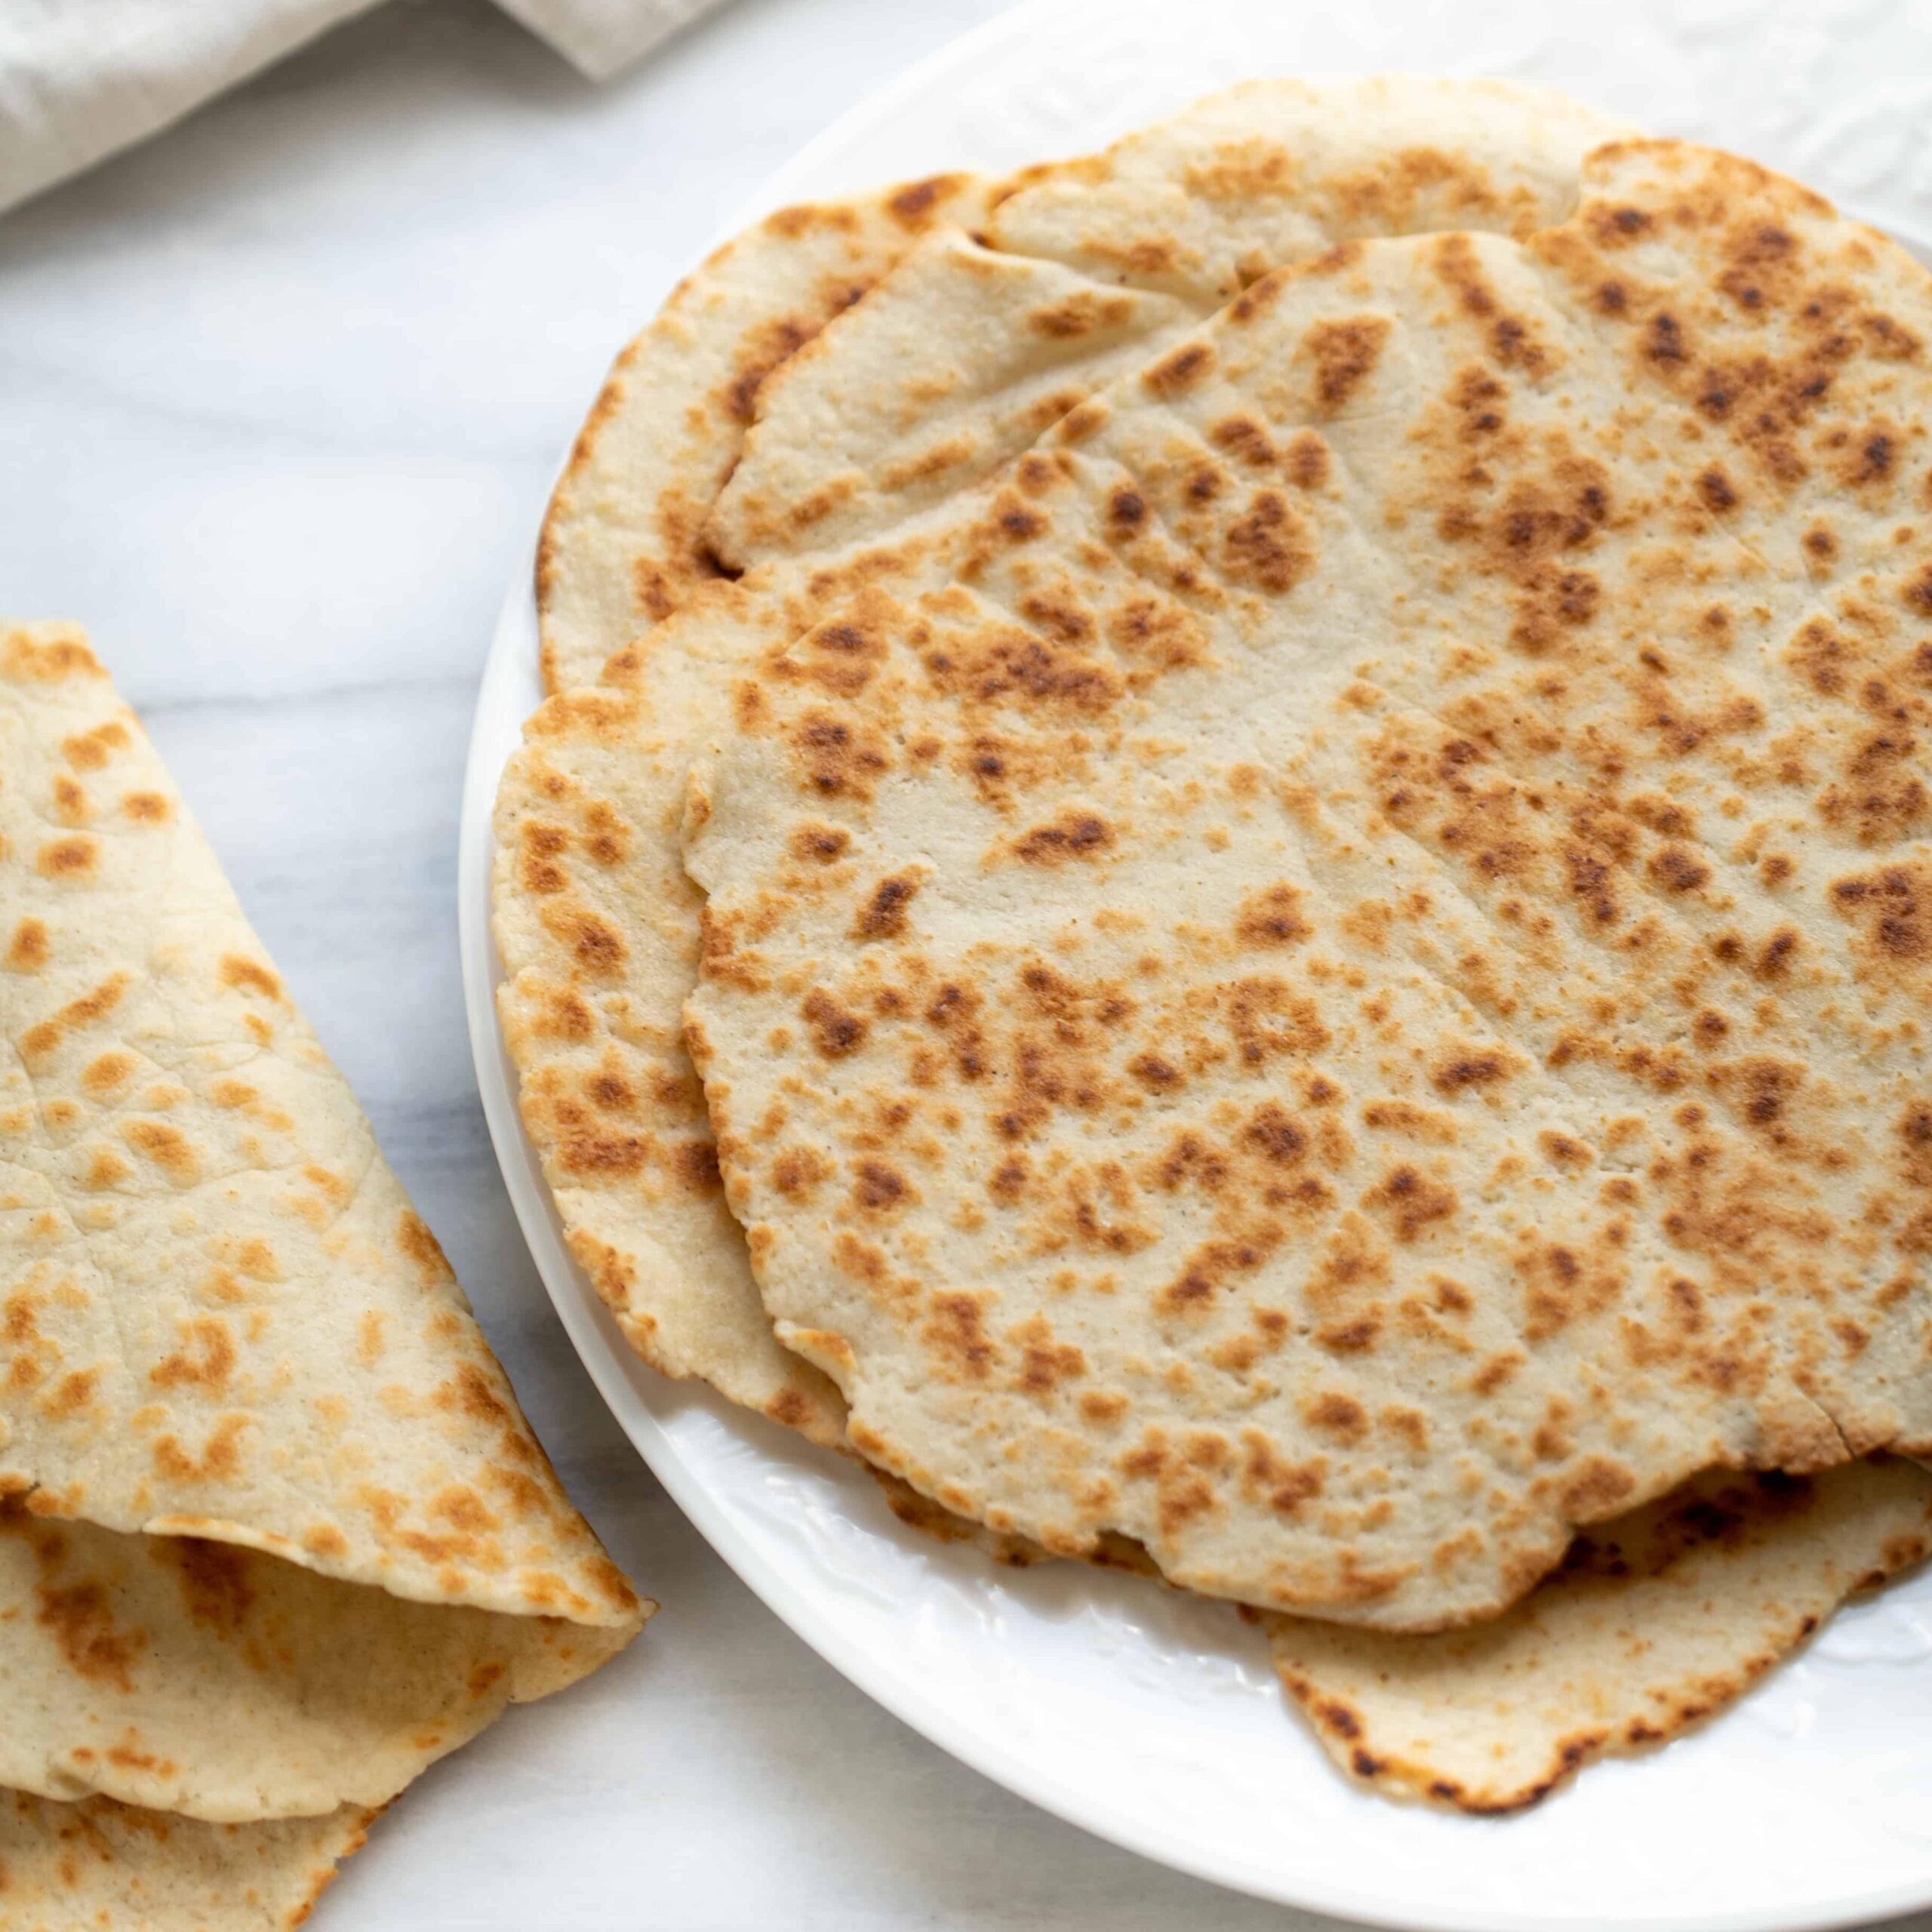  Tired of plain old sandwich bread? My gluten-free flatbread wraps are here to save the day!